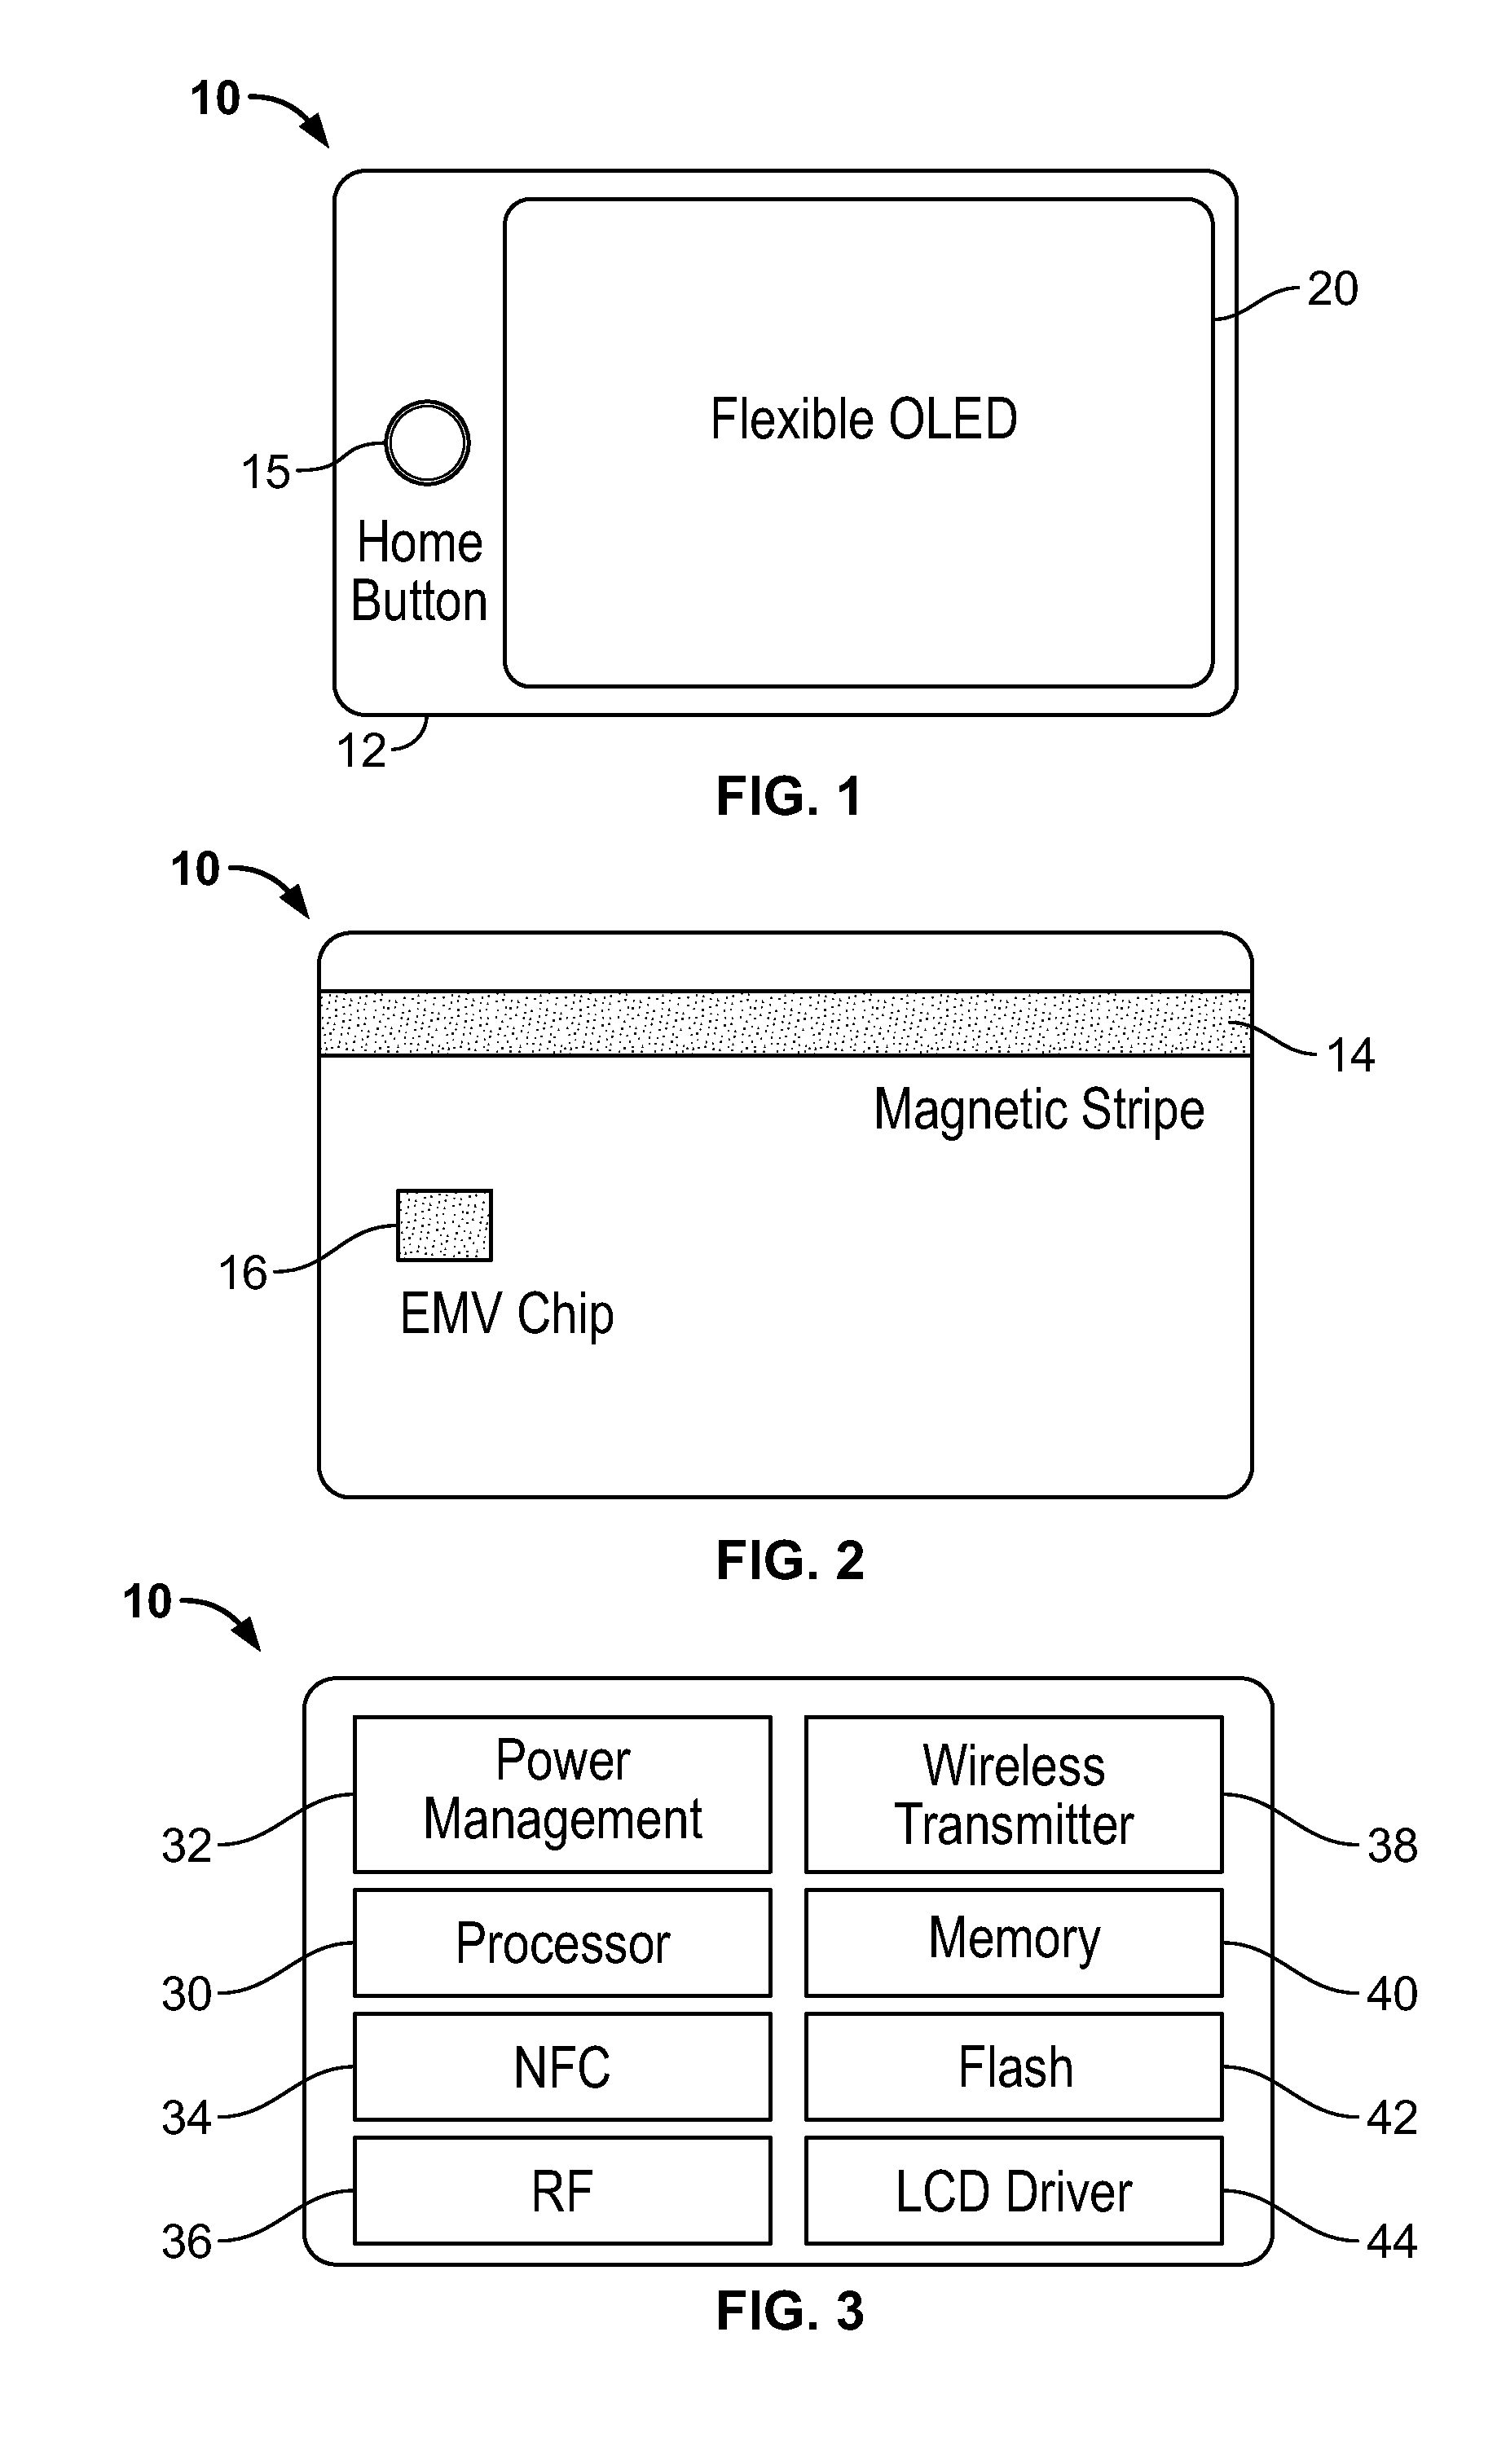 Programmable Electronic Card and Supporting Device